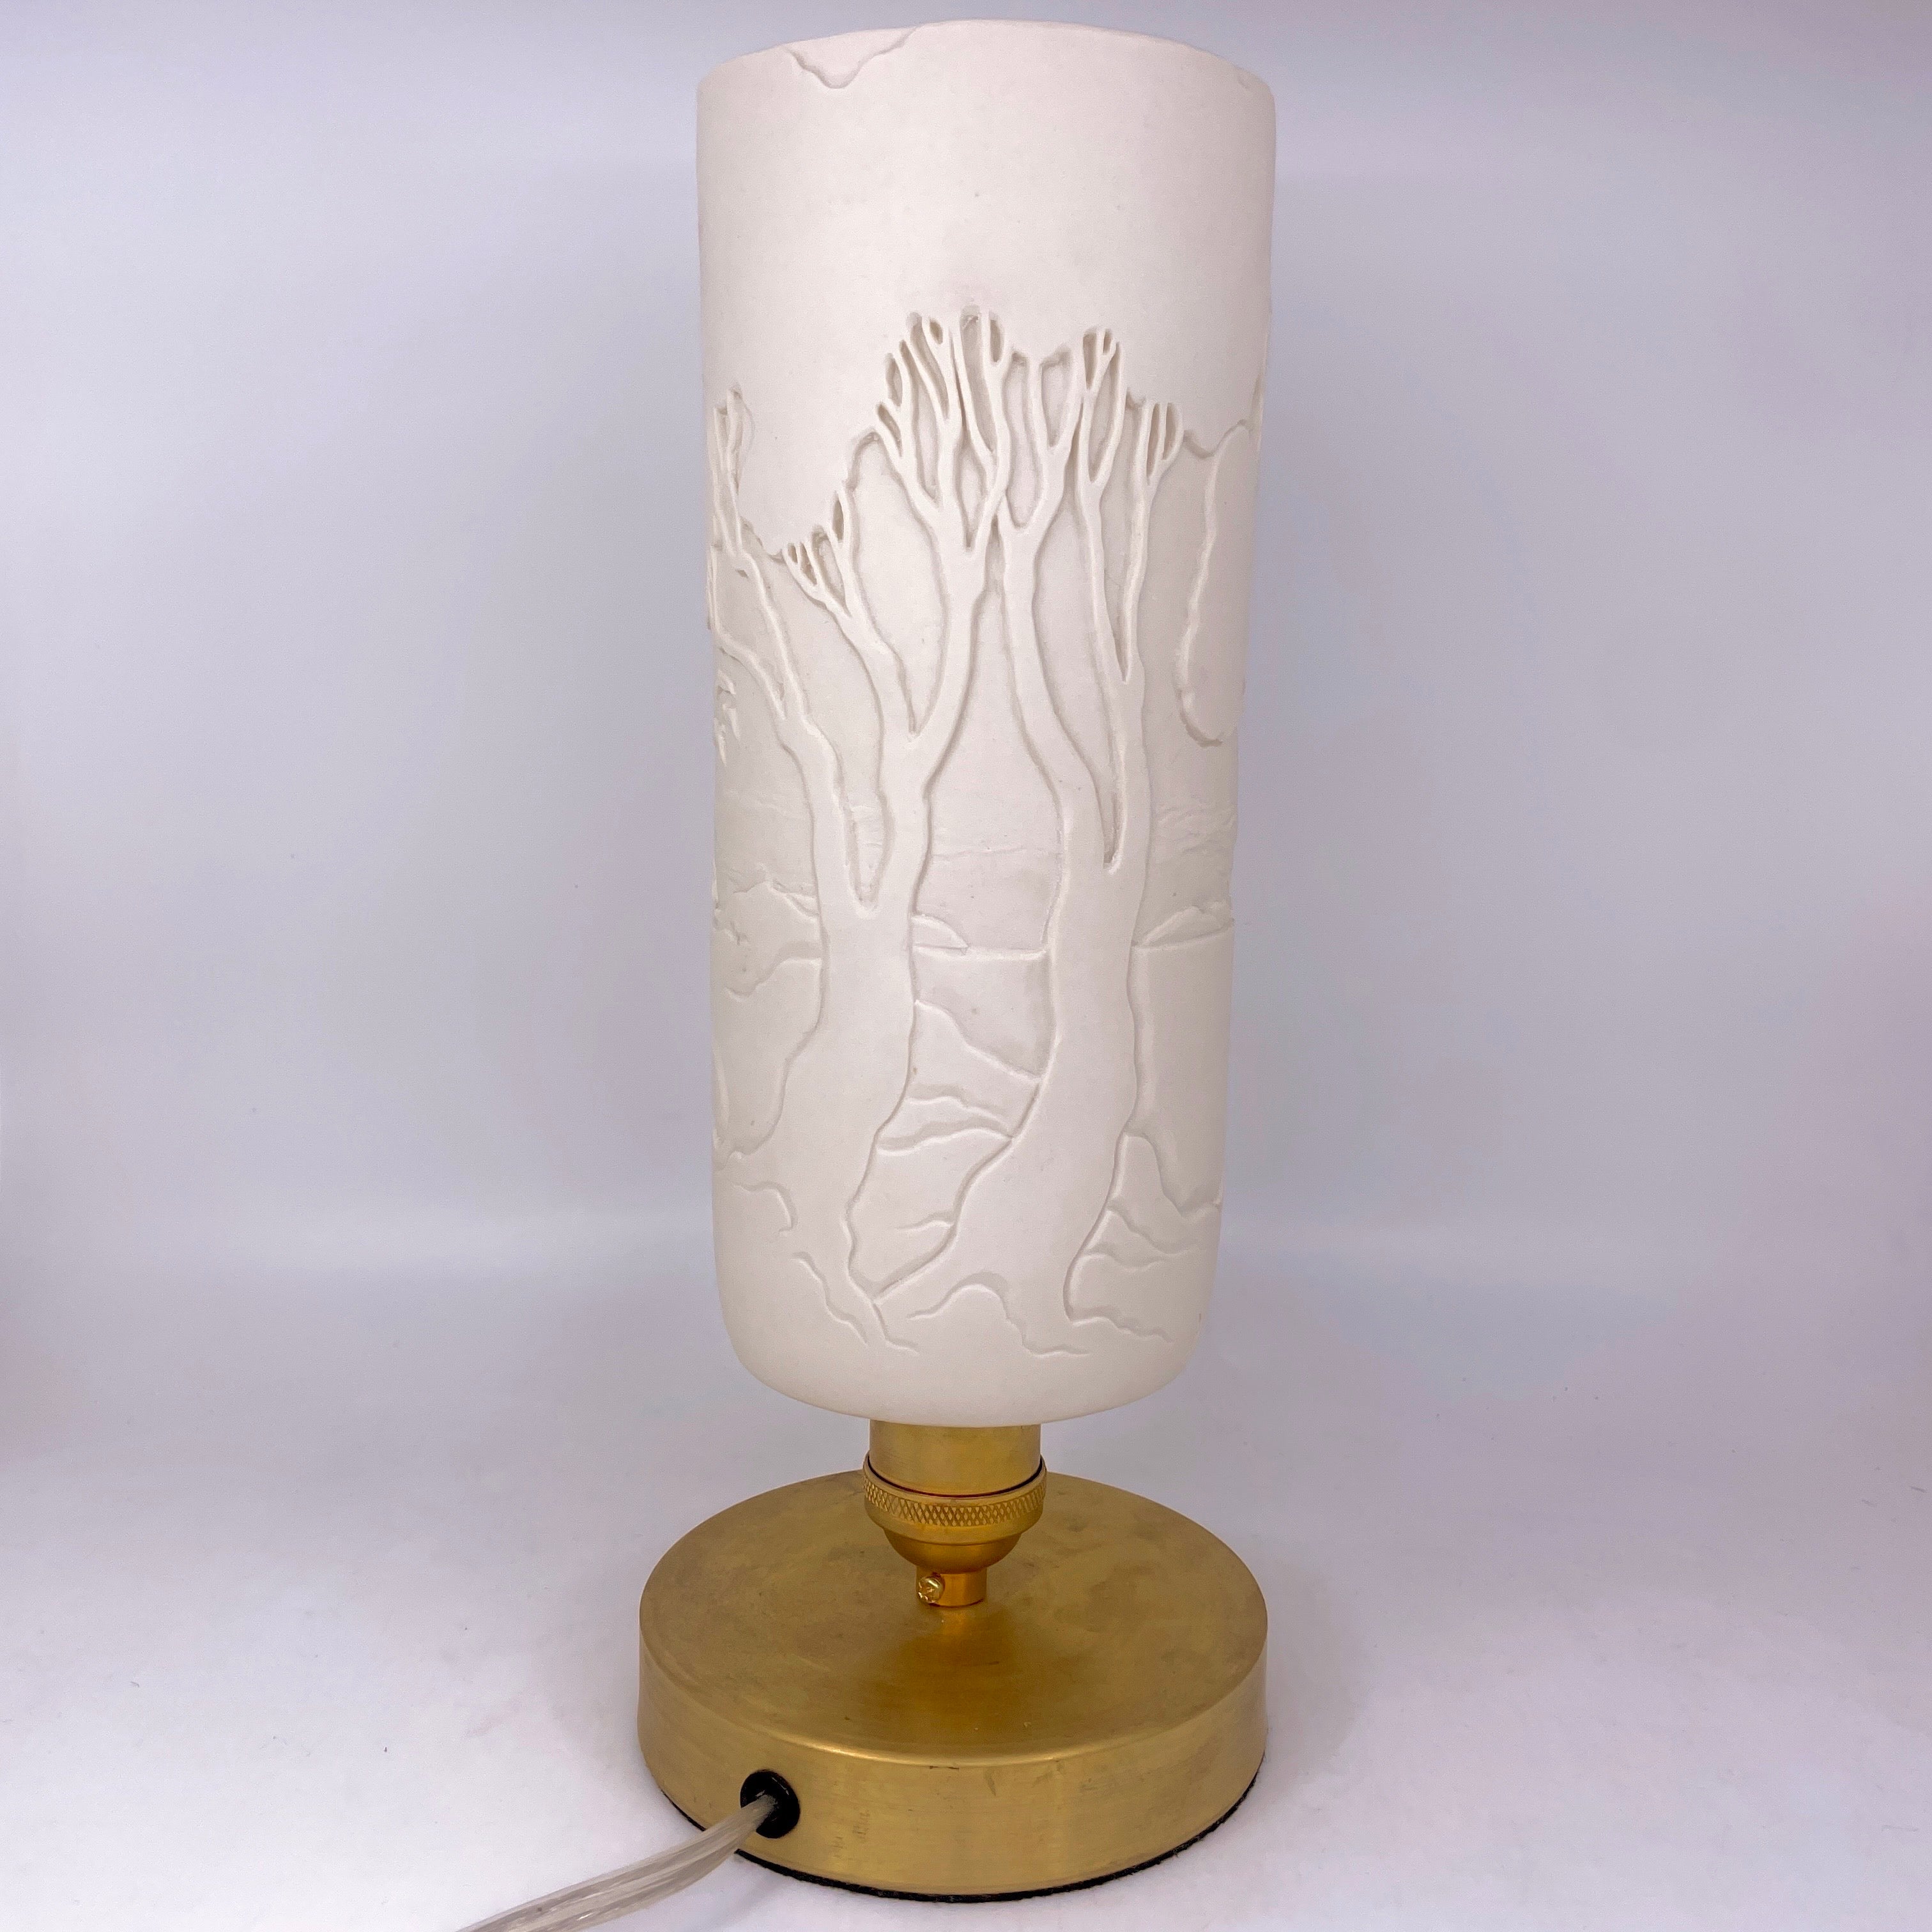 Table Lamp Installment- Madrona” hand-carved White Porcelain Shade and Choice of Base (ready to ship) Collaboration with Mary Jane Elgin